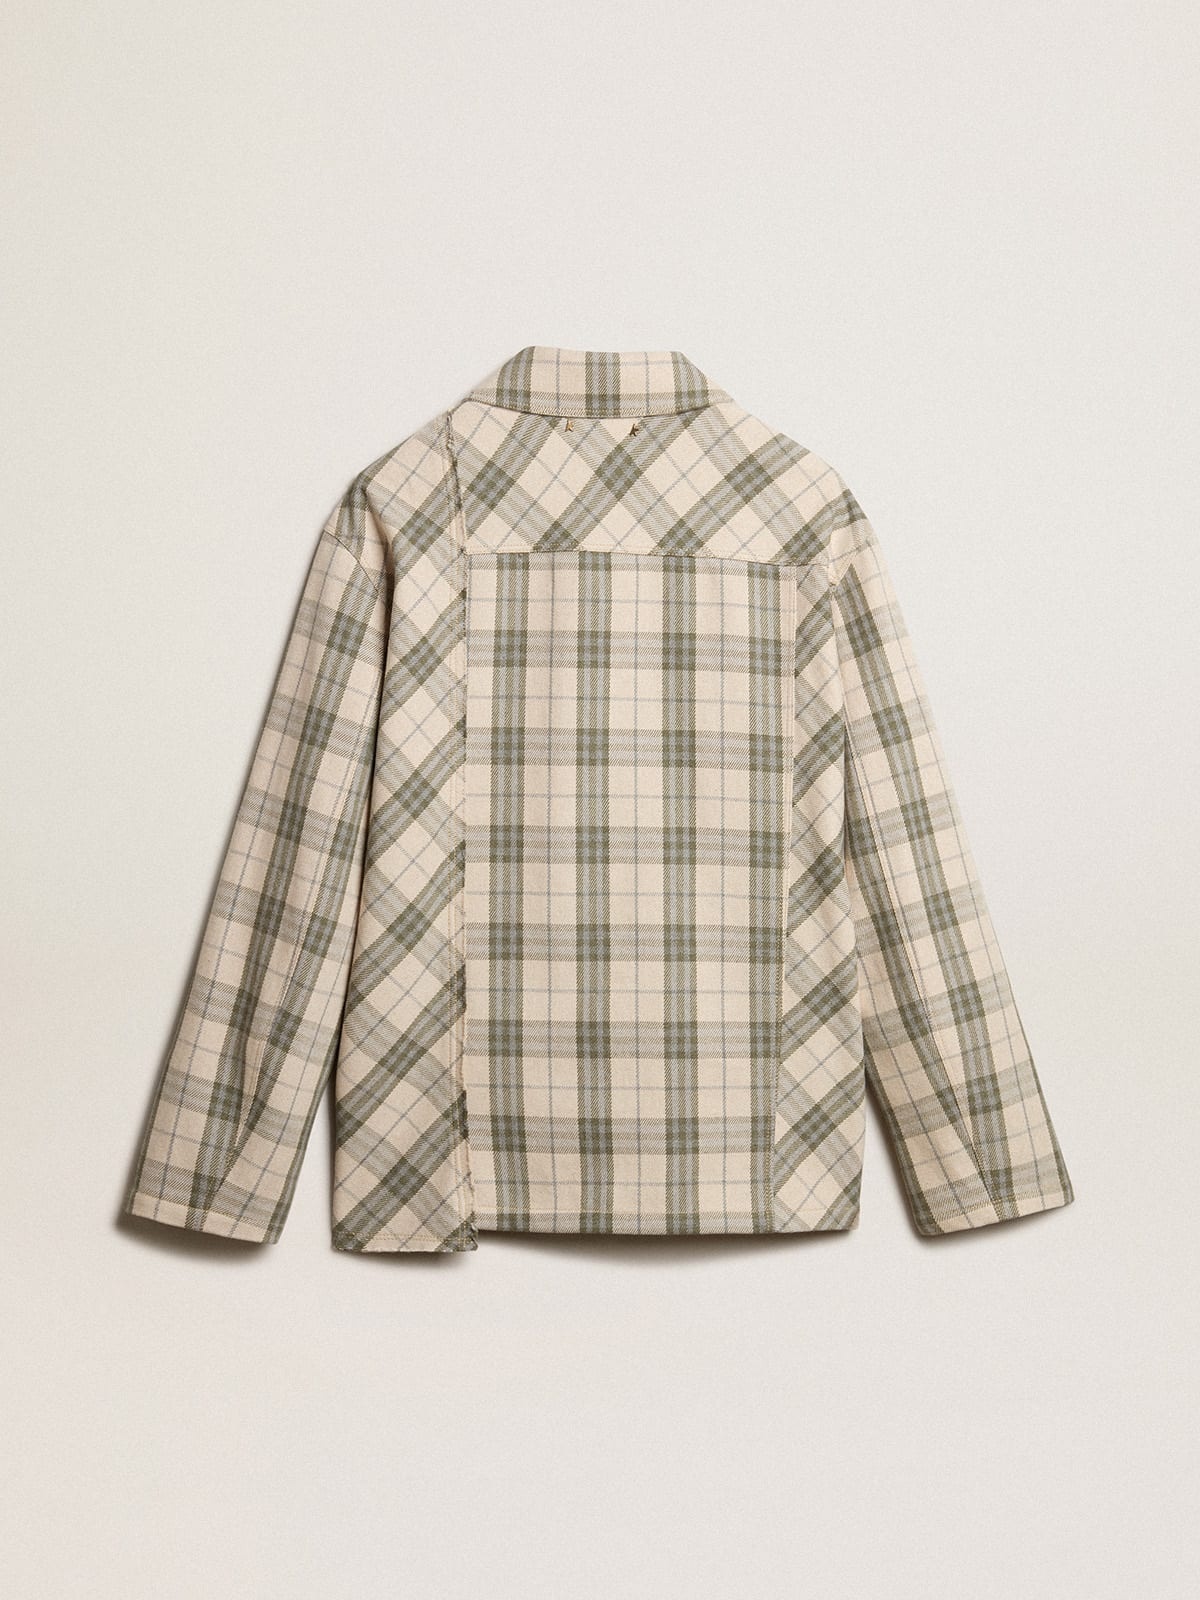 Men's slim-fit shirt made of ecru and green cotton flannel - 5